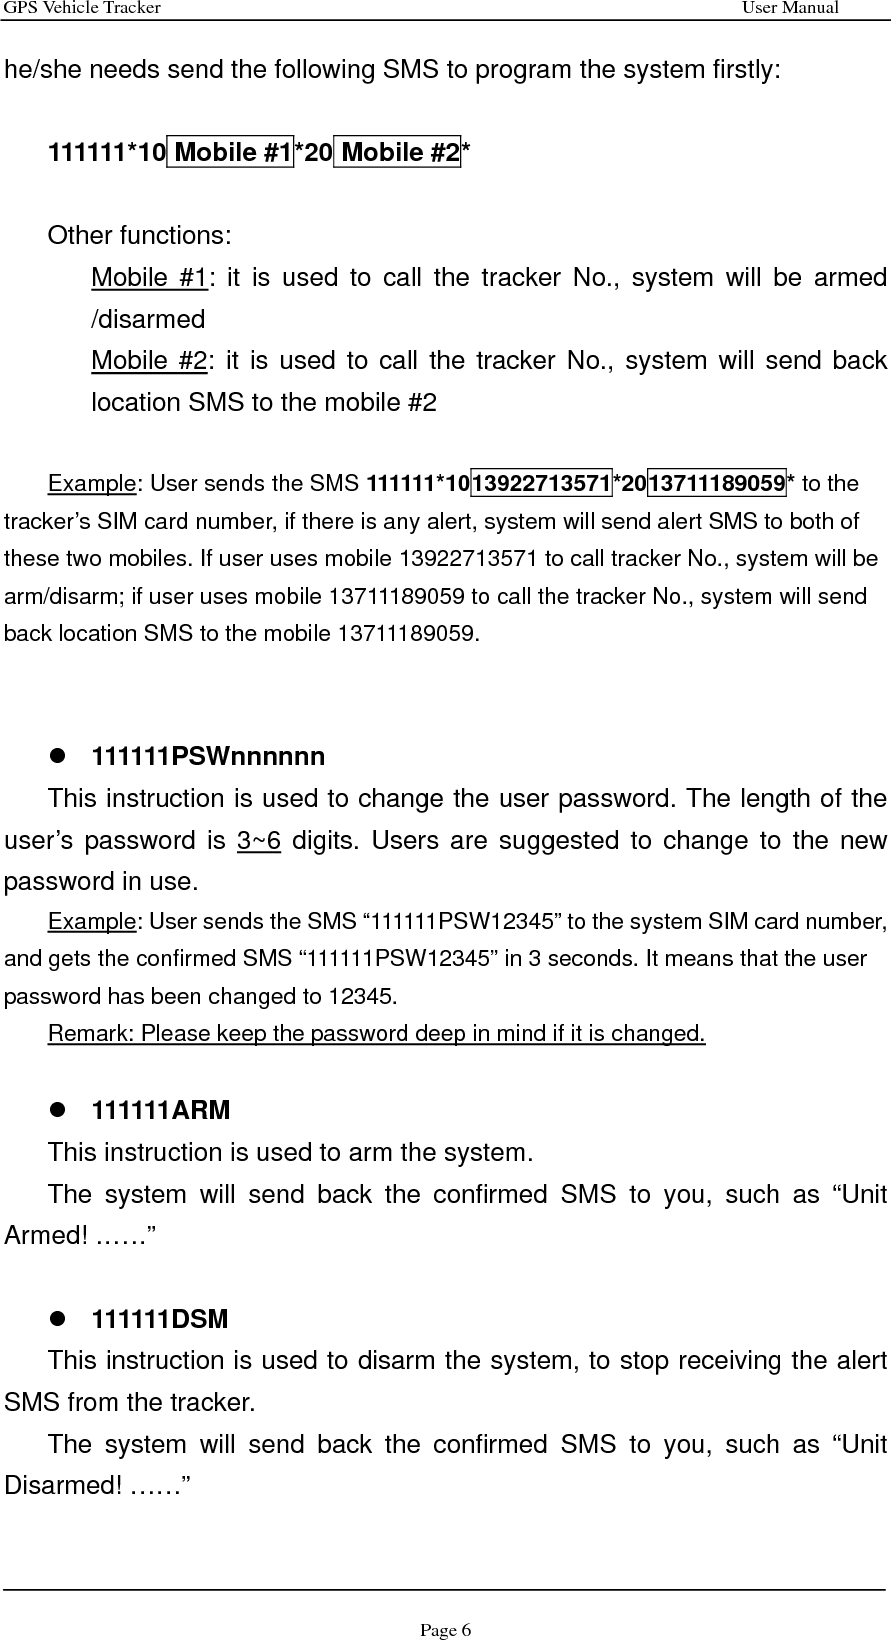 GPS Vehicle Tracker                                                              User Manual Page 6 he/she needs send the following SMS to program the system firstly:  111111*10 Mobile #1*20 Mobile #2*  Other functions:   Mobile #1: it is used to call the tracker No., system will be armed /disarmed Mobile #2: it is used to call the tracker No., system will send back location SMS to the mobile #2  Example: User sends the SMS 111111*1013922713571*2013711189059* to the tracker’s SIM card number, if there is any alert, system will send alert SMS to both of these two mobiles. If user uses mobile 13922713571 to call tracker No., system will be arm/disarm; if user uses mobile 13711189059 to call the tracker No., system will send back location SMS to the mobile 13711189059.   z 111111PSWnnnnnn This instruction is used to change the user password. The length of the user’s password is 3~6 digits. Users are suggested to change to the new password in use. Example: User sends the SMS “111111PSW12345” to the system SIM card number, and gets the confirmed SMS “111111PSW12345” in 3 seconds. It means that the user password has been changed to 12345. Remark: Please keep the password deep in mind if it is changed.  z 111111ARM This instruction is used to arm the system. The system will send back the confirmed SMS to you, such as “Unit Armed! ……”  z 111111DSM This instruction is used to disarm the system, to stop receiving the alert SMS from the tracker. The system will send back the confirmed SMS to you, such as “Unit Disarmed! ……”  